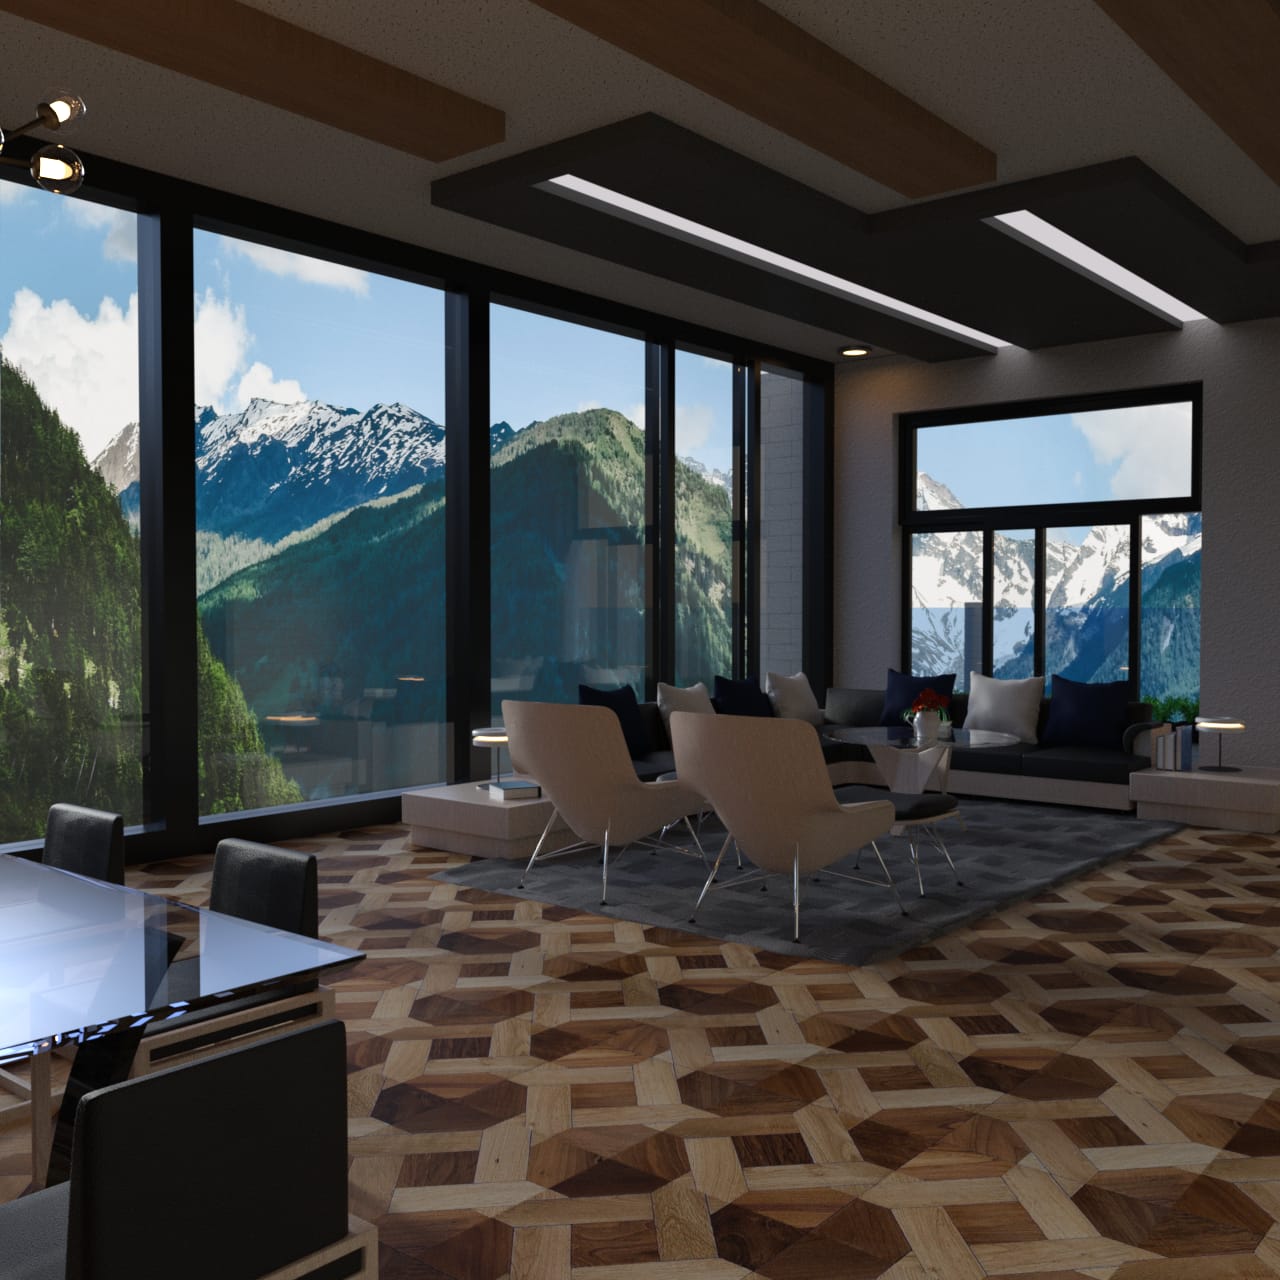 3d asset of a penthouse living room with big windows